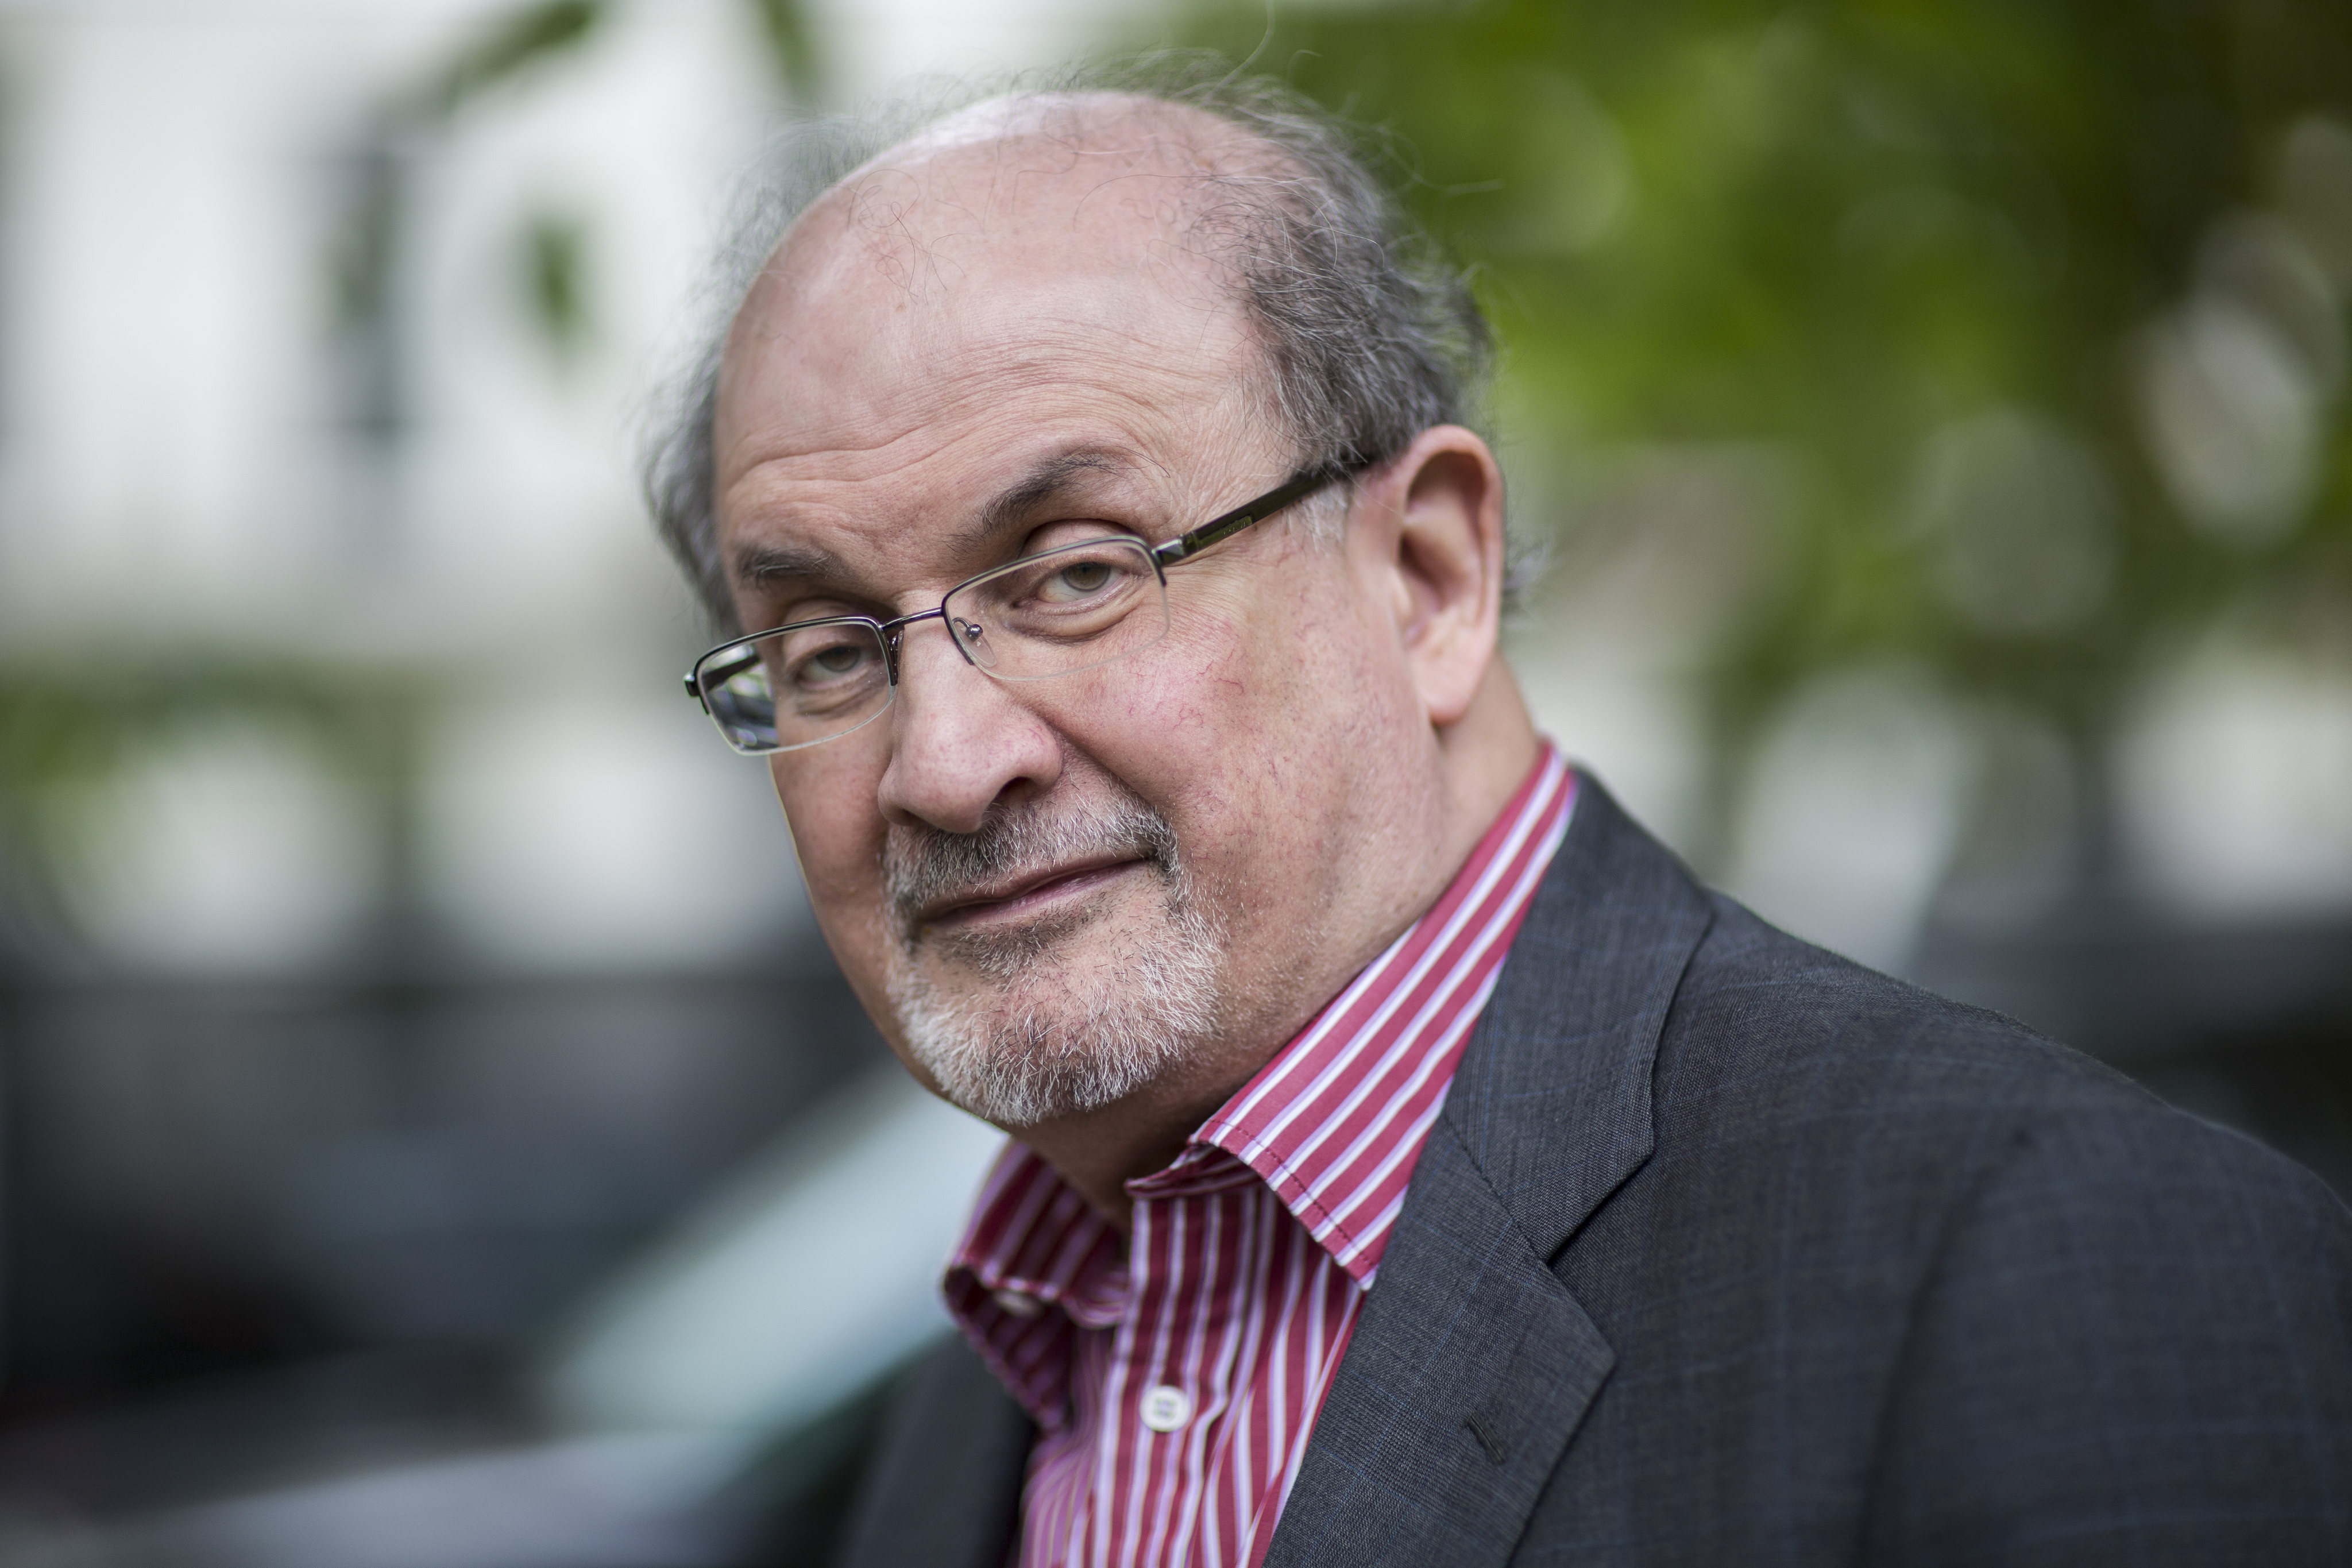 Salman Rushdie at the Cheltenham Literature Festival in England on October 10, 2015. Photo: Getty Images